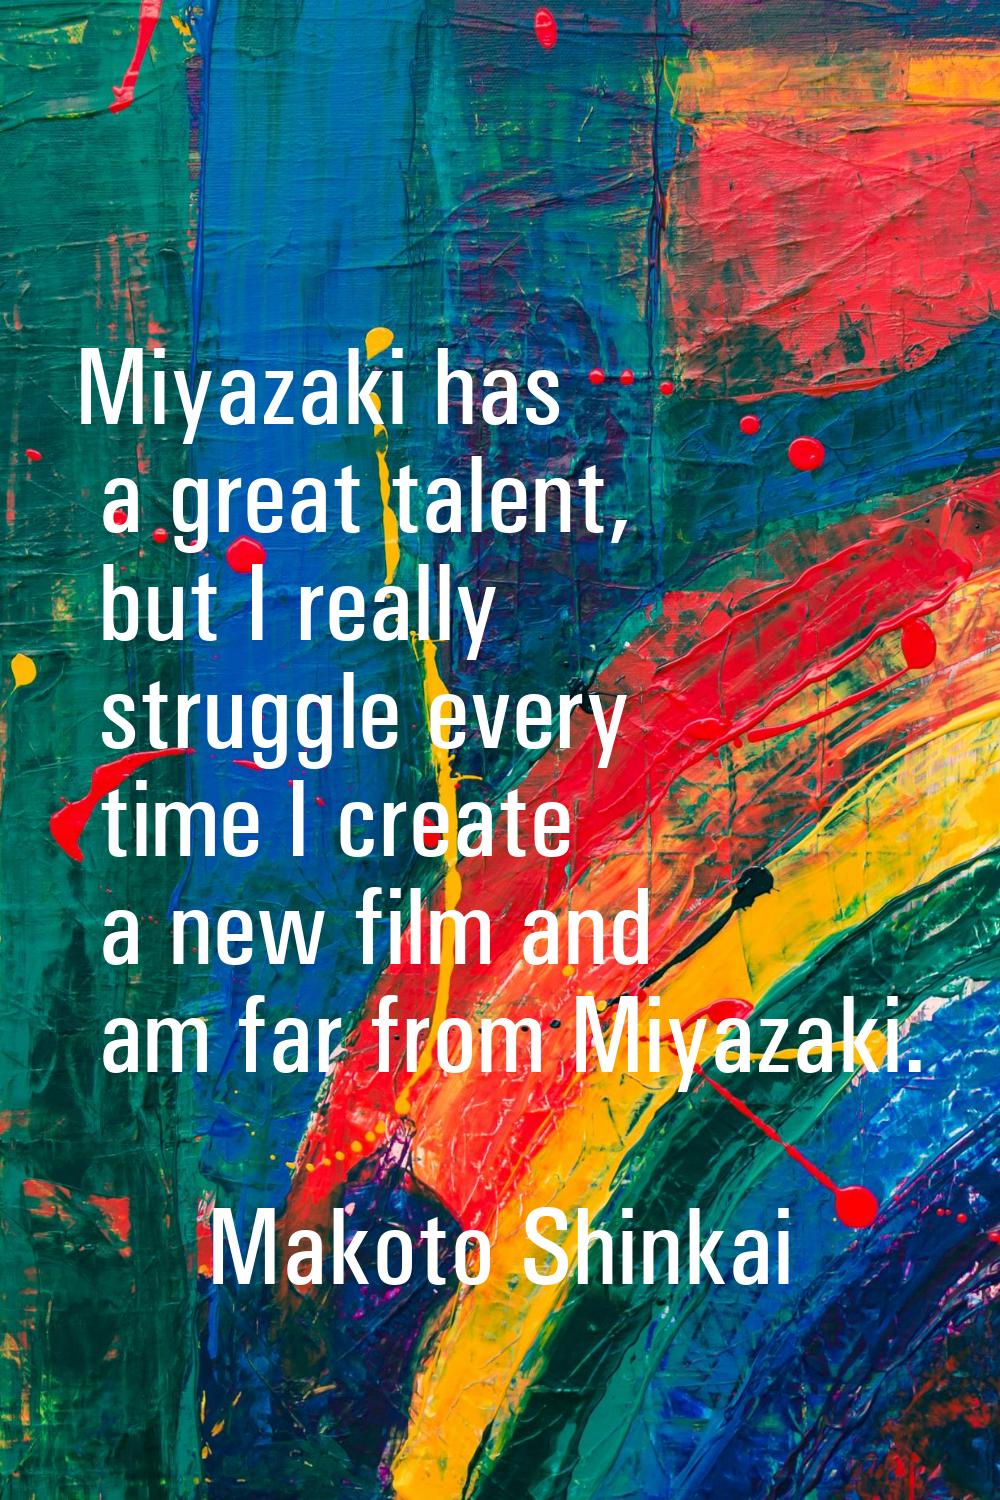 Miyazaki has a great talent, but I really struggle every time I create a new film and am far from M